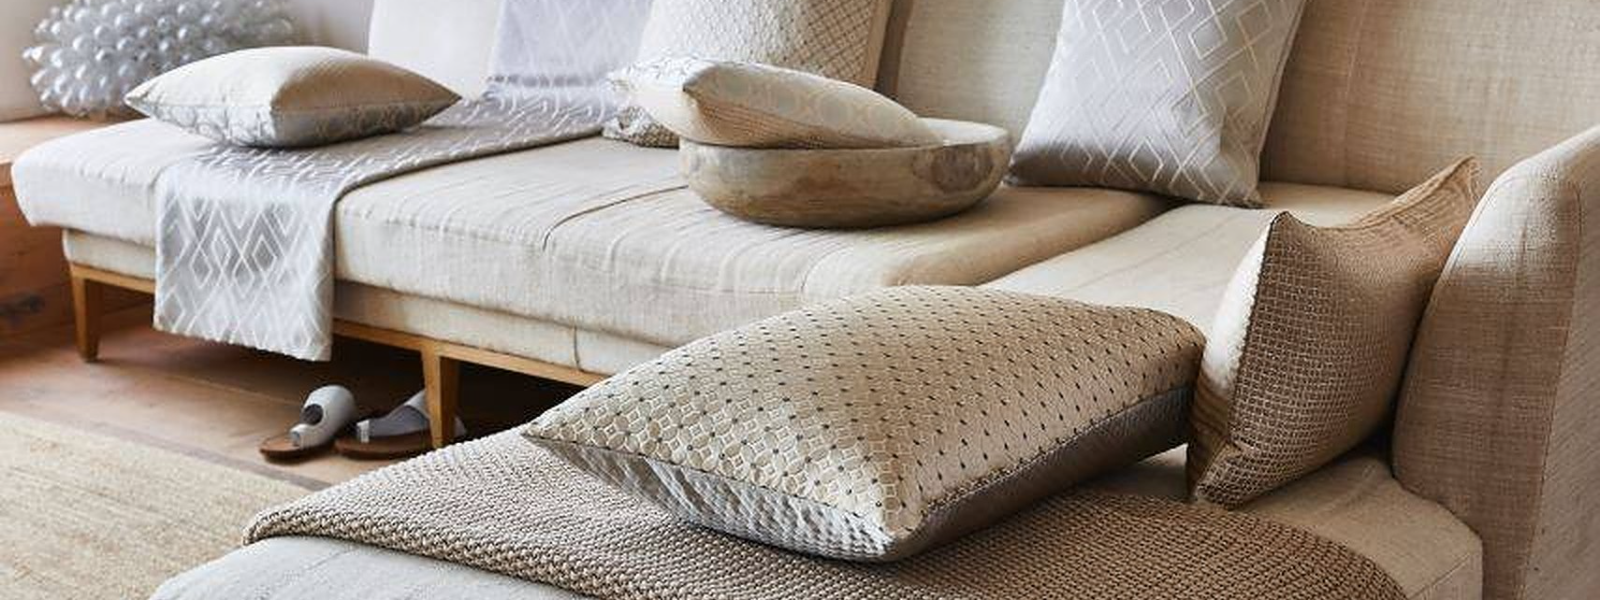 Manufacture of furnishing articles, incl. bedspreads, kitchen towels, curtains, valances and other blinds in Tartu